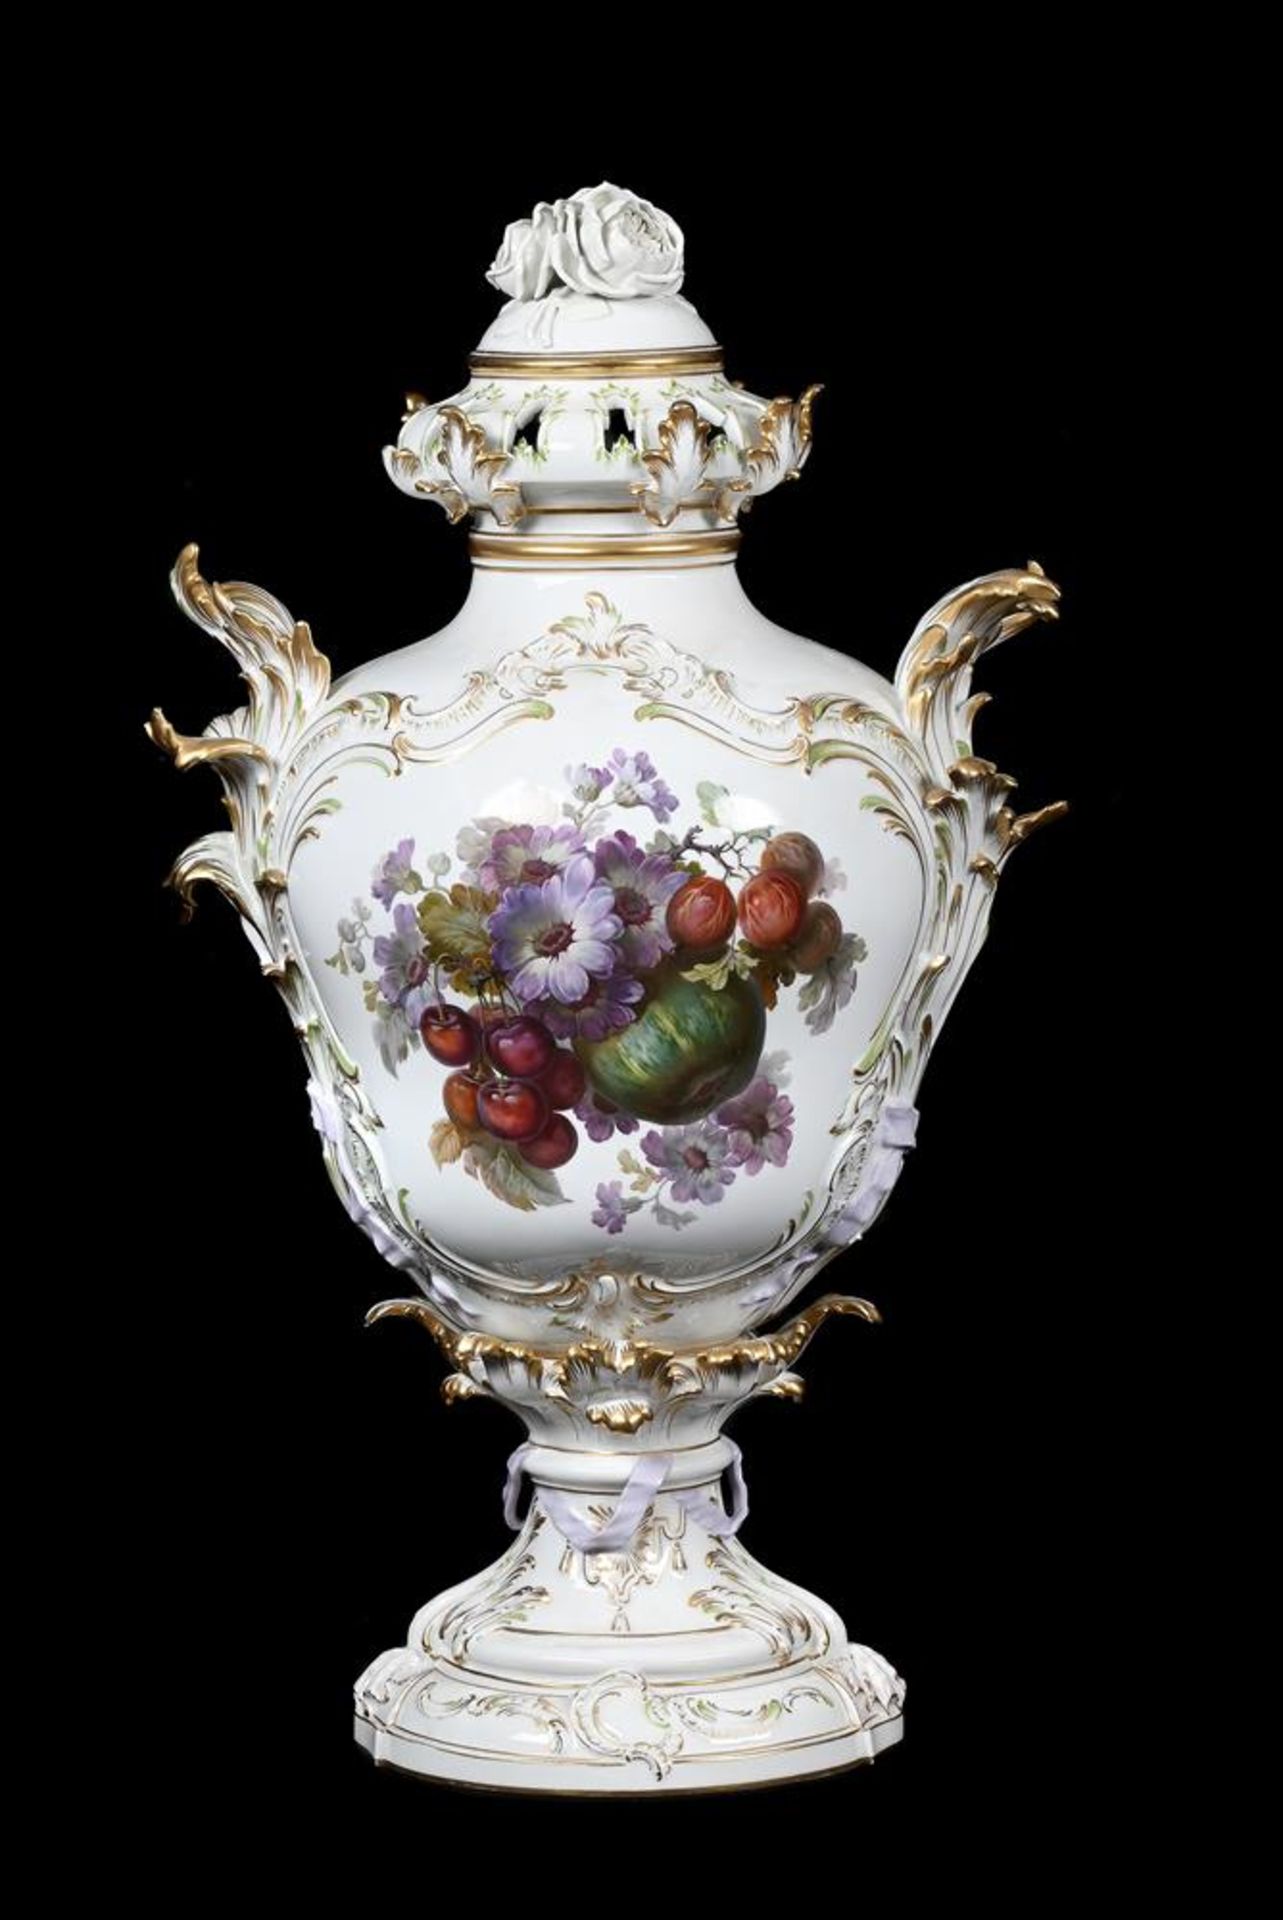 A BERLIN (KPM) TWO-HANDLED VASE AND PIERCED COVER, CIRCA 1900 - Image 2 of 6